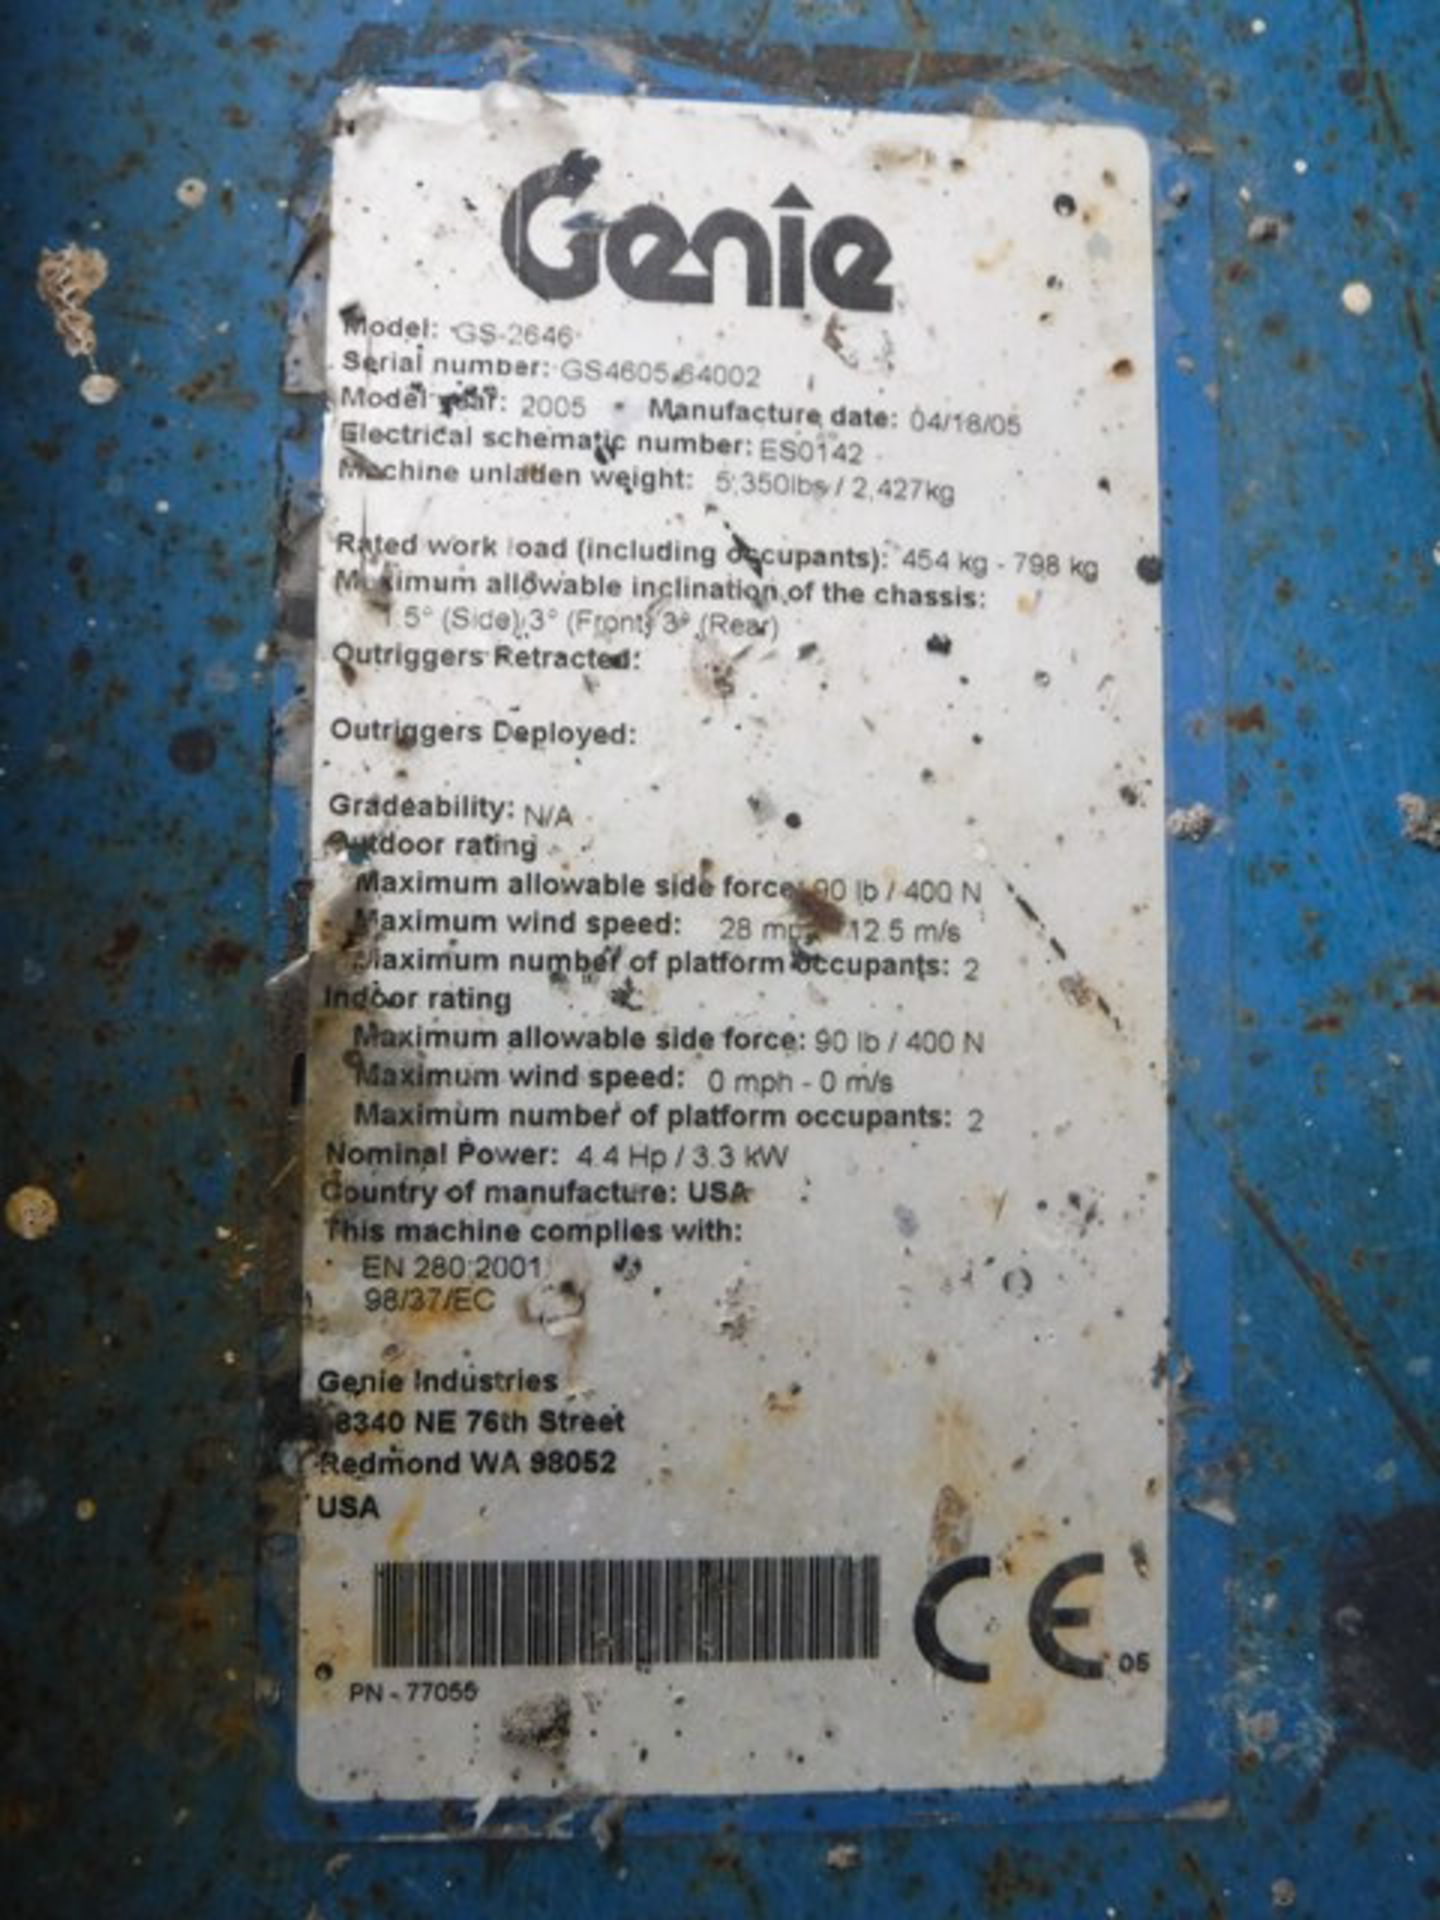 2005 GENIE GS2646, S/N GS4605-64002, 412HRS (NOT VERIFIED) - Image 11 of 12